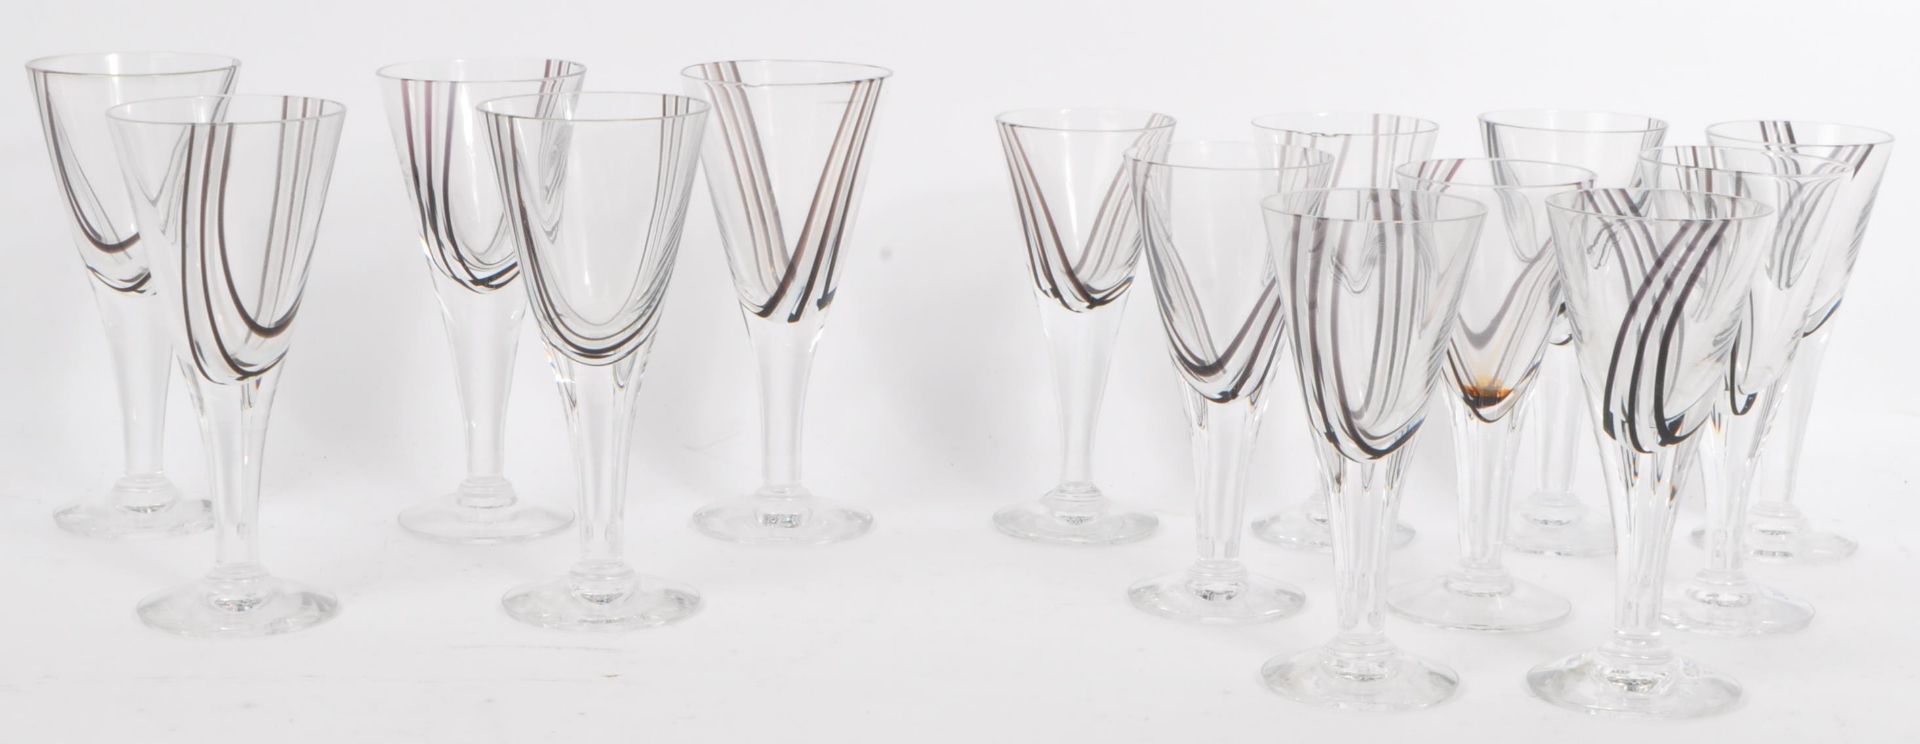 COLLECTION OF CAITHNESS CRYSTAL GLASSES - PANACHE PATTERN - Image 8 of 13